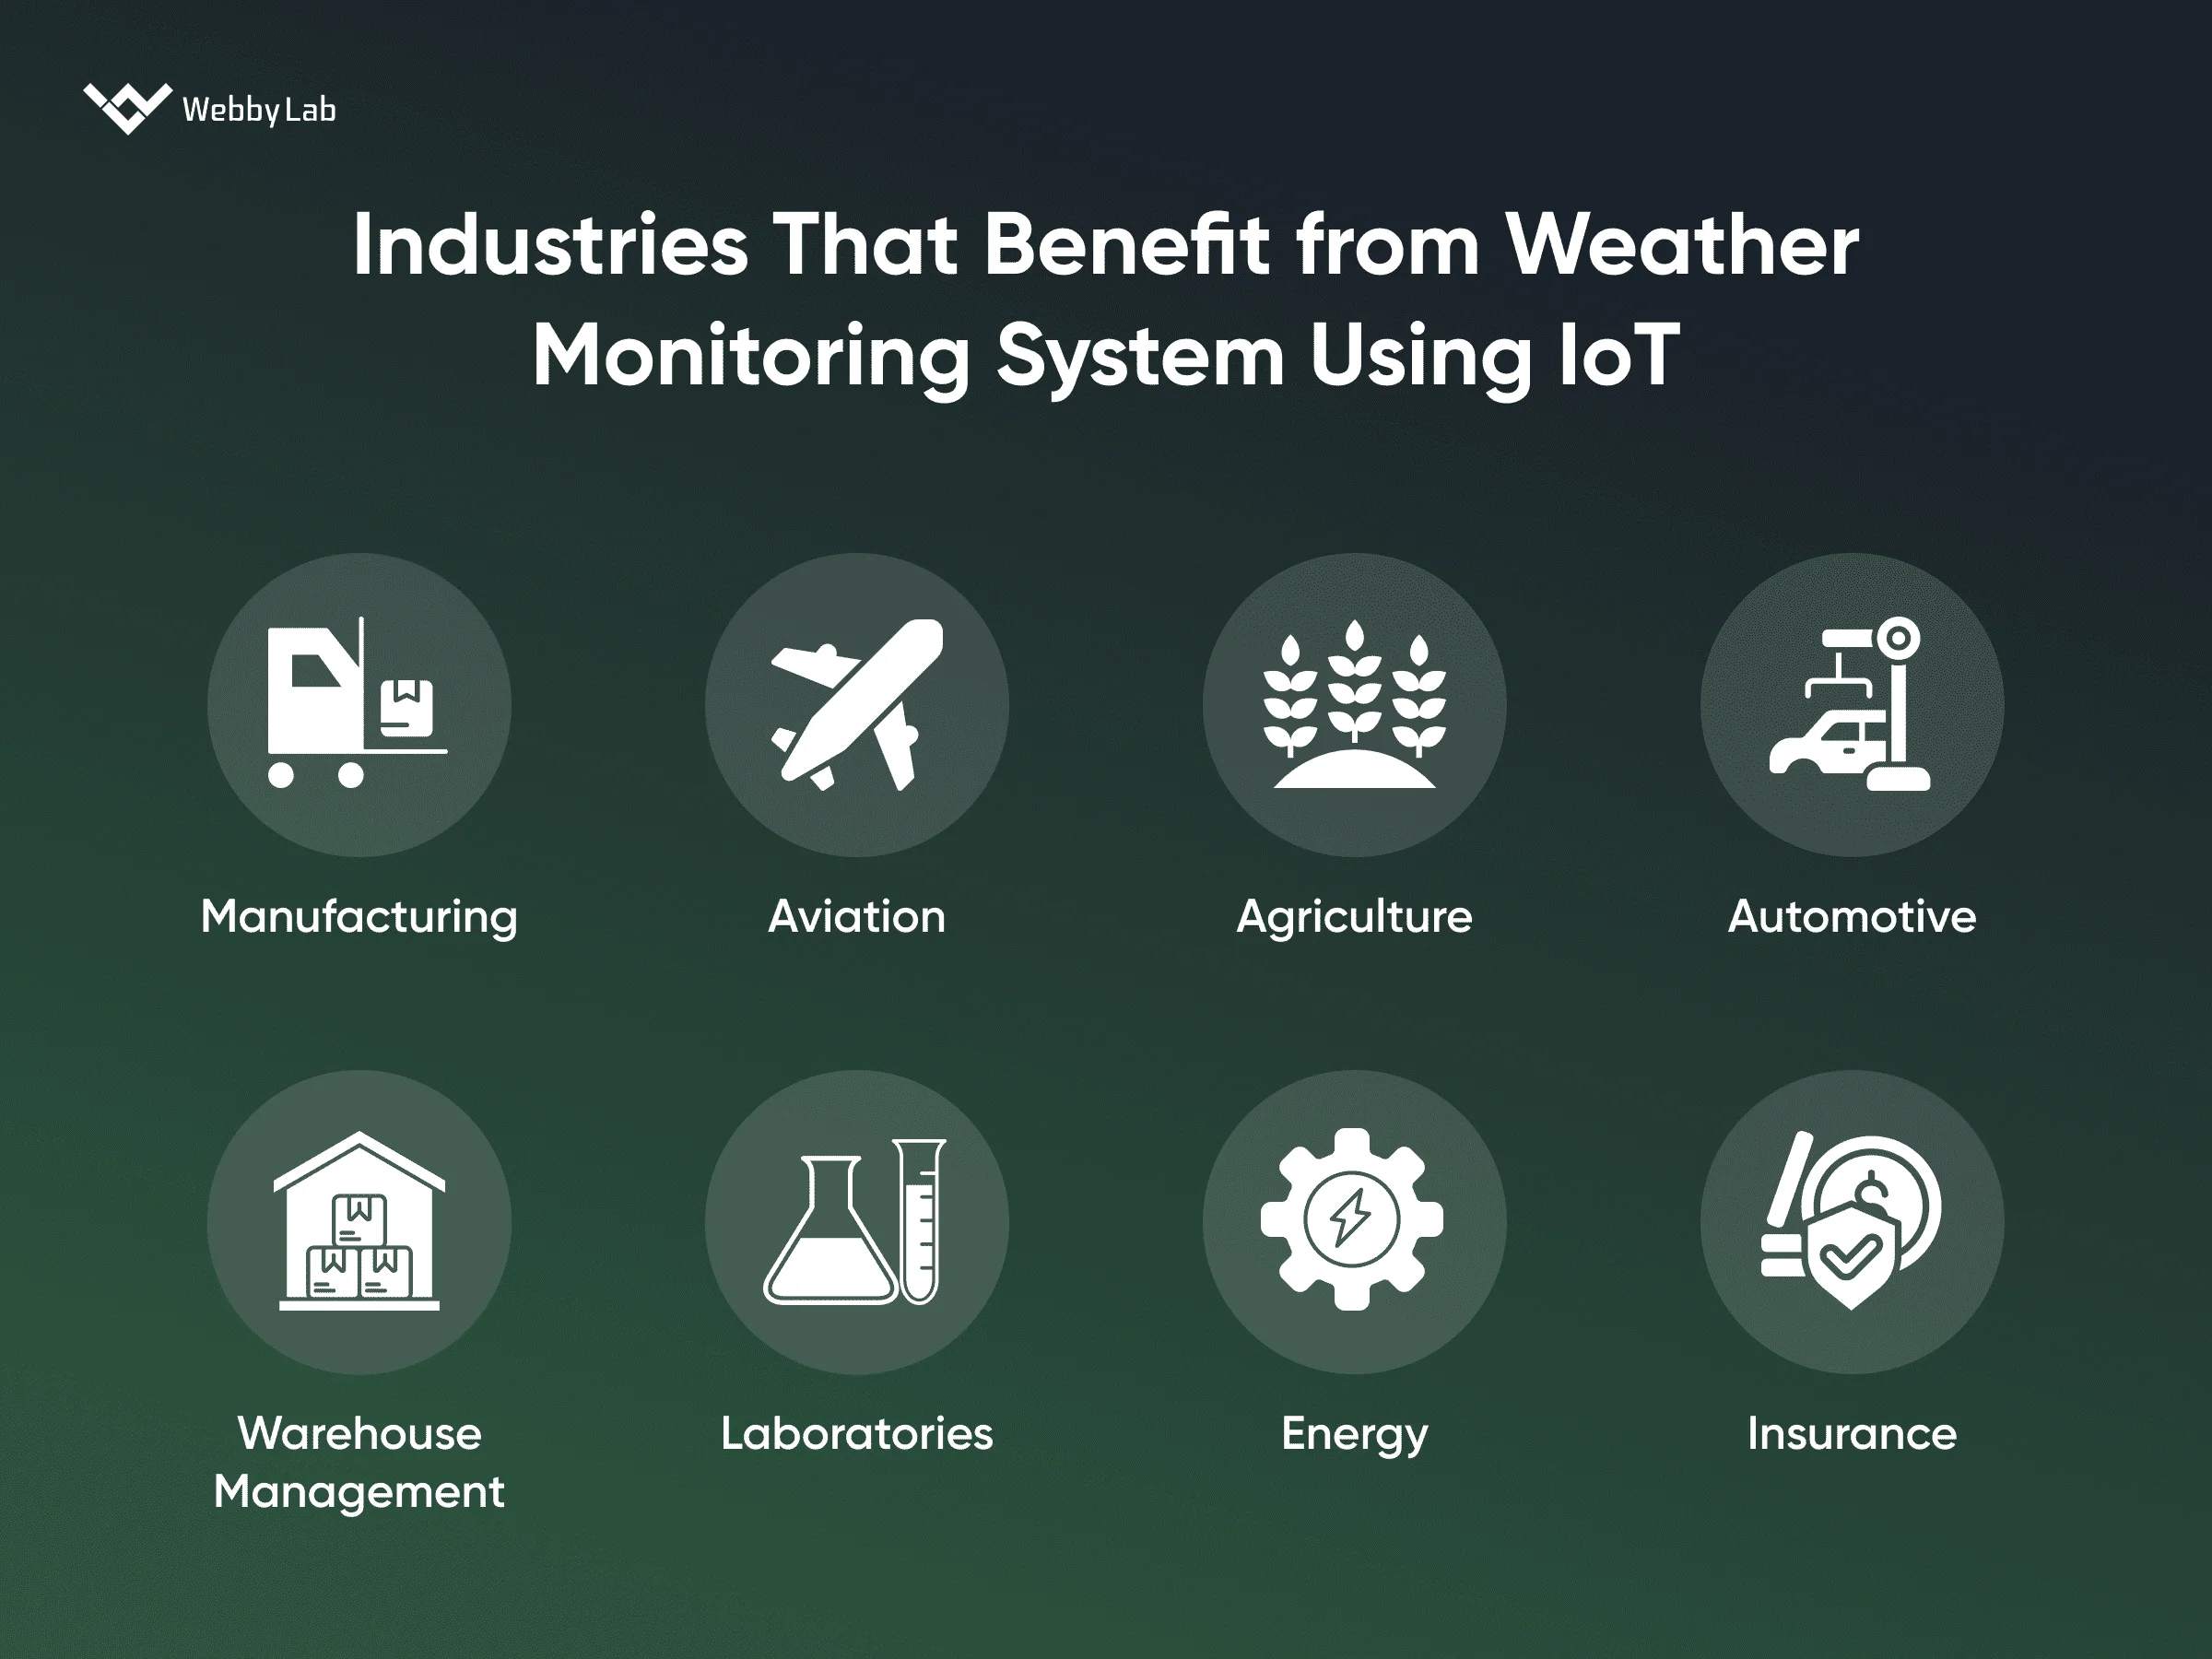 Industries That Benefit from Weather Monitoring System Using IoT